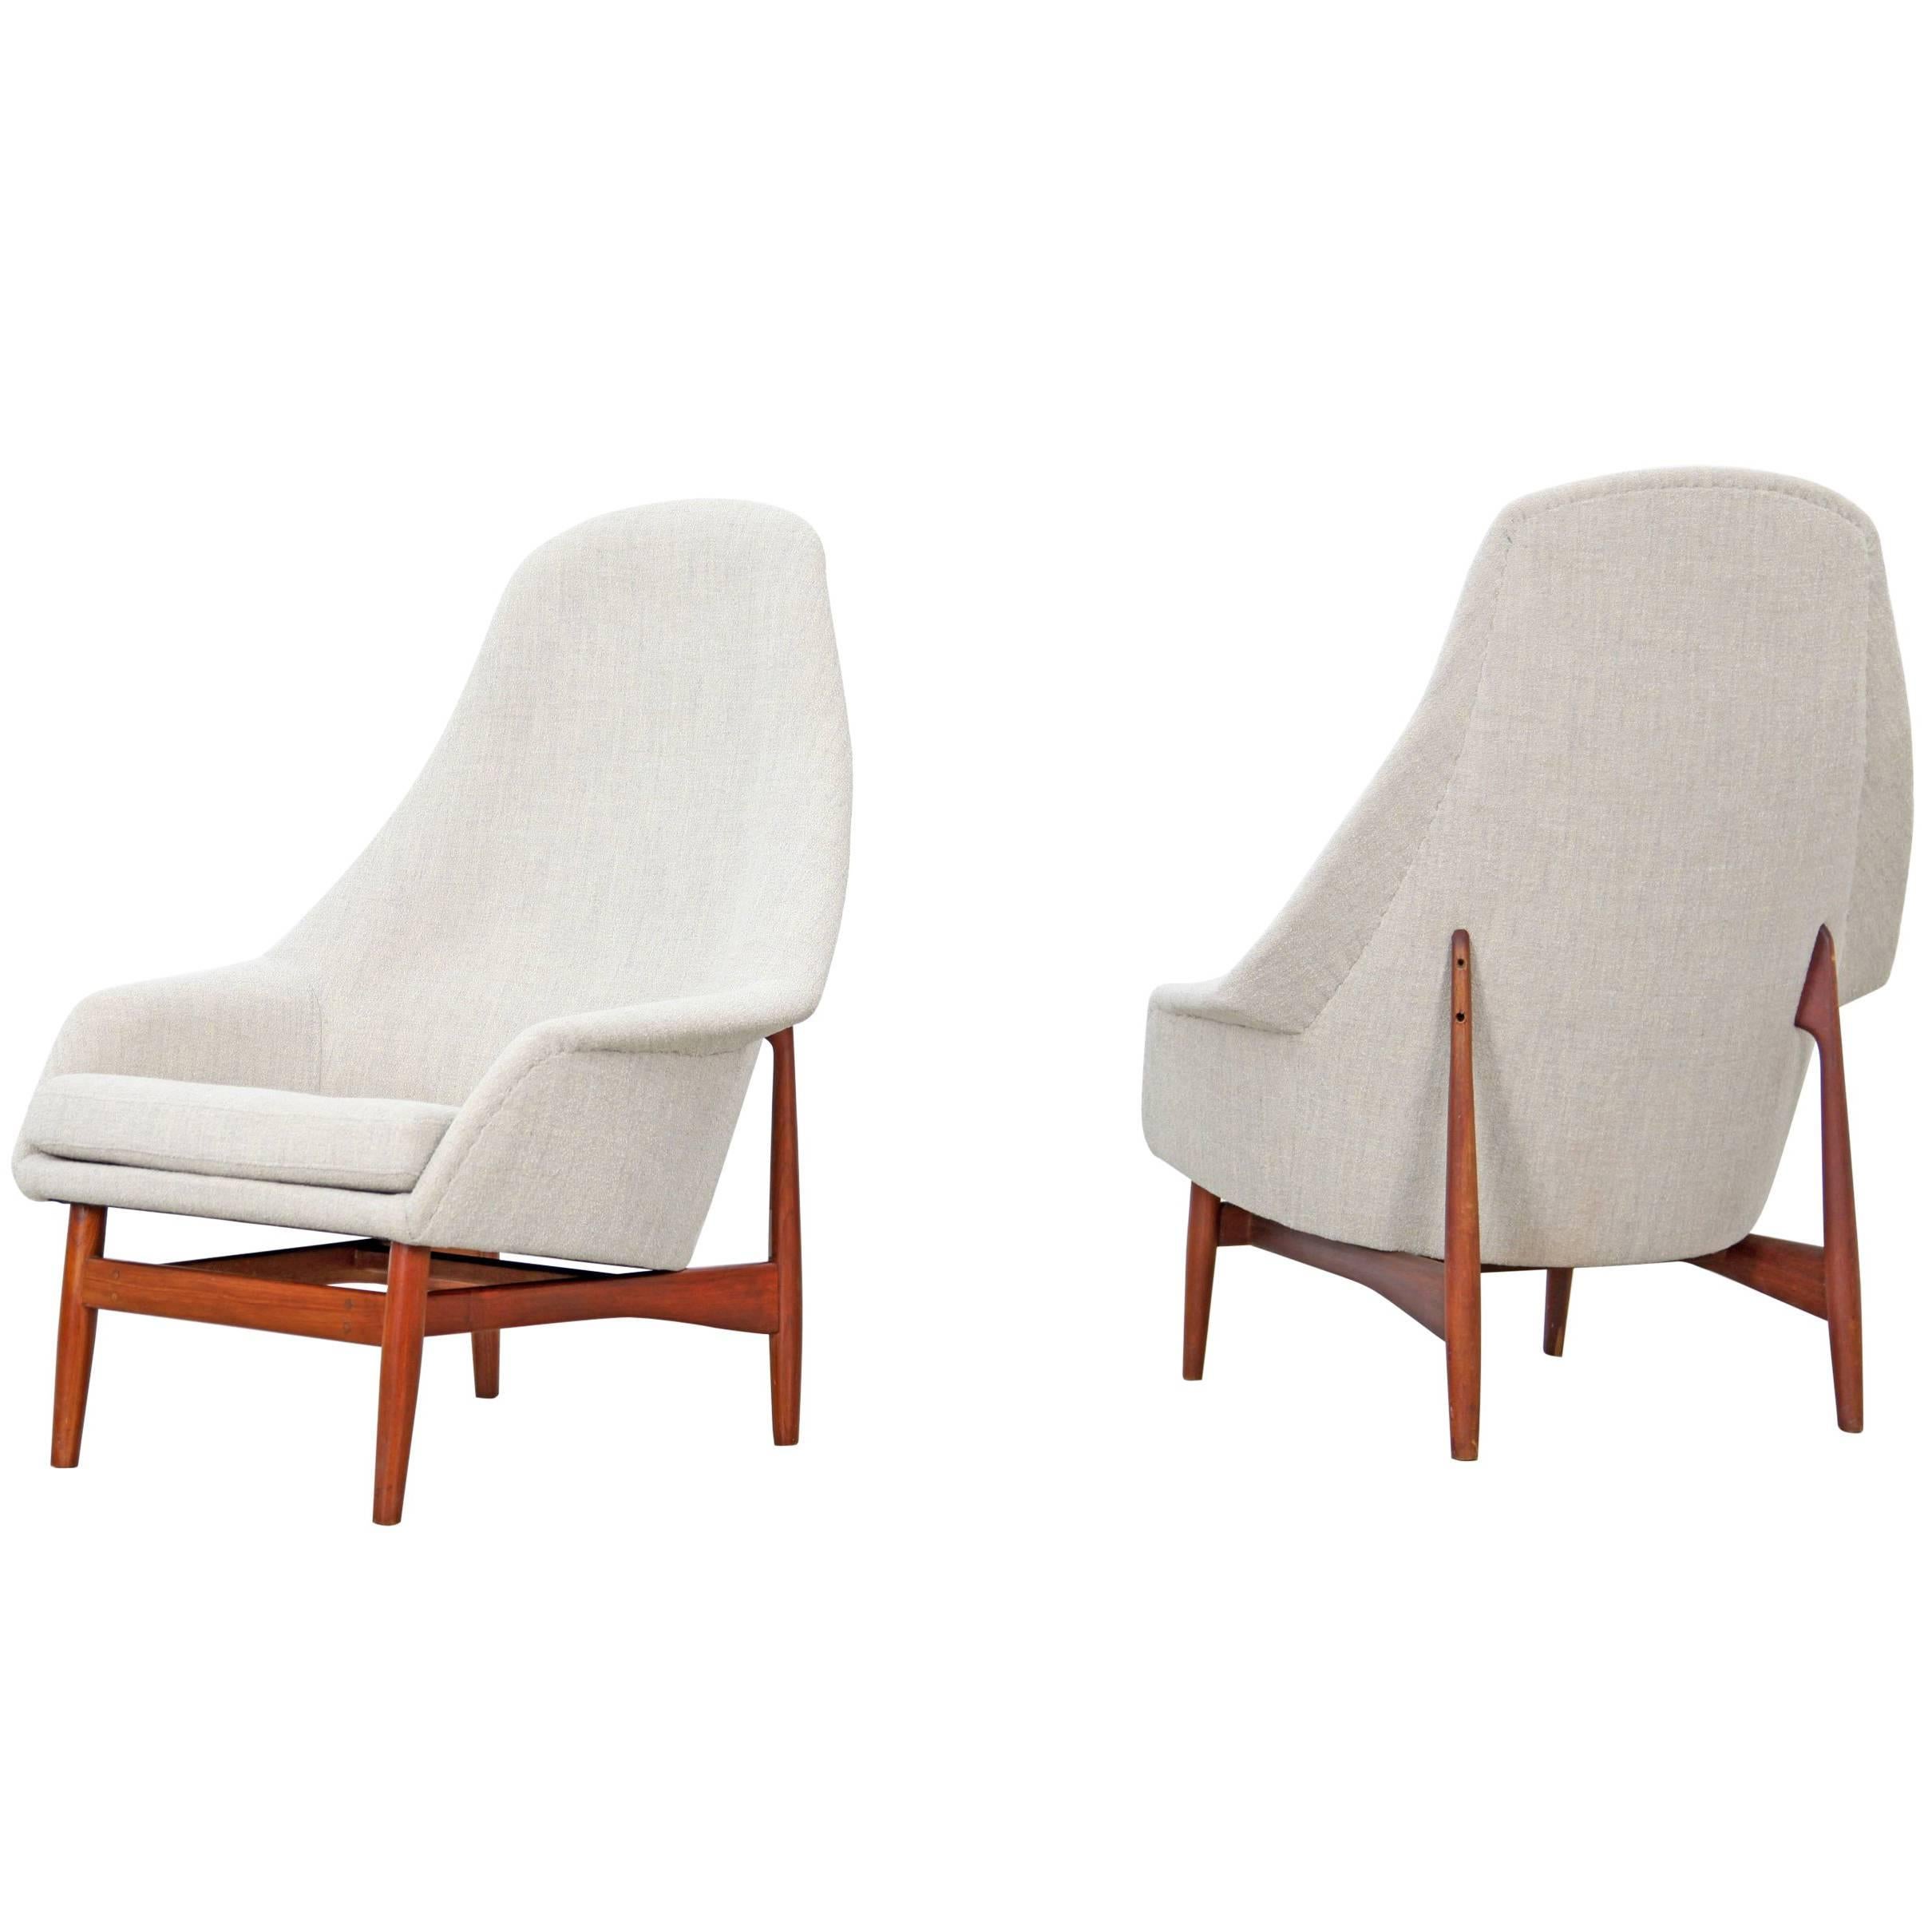 Set of Two High Back Lounge Chairs by Ib Kofod-Larsen, 1957 For Sale